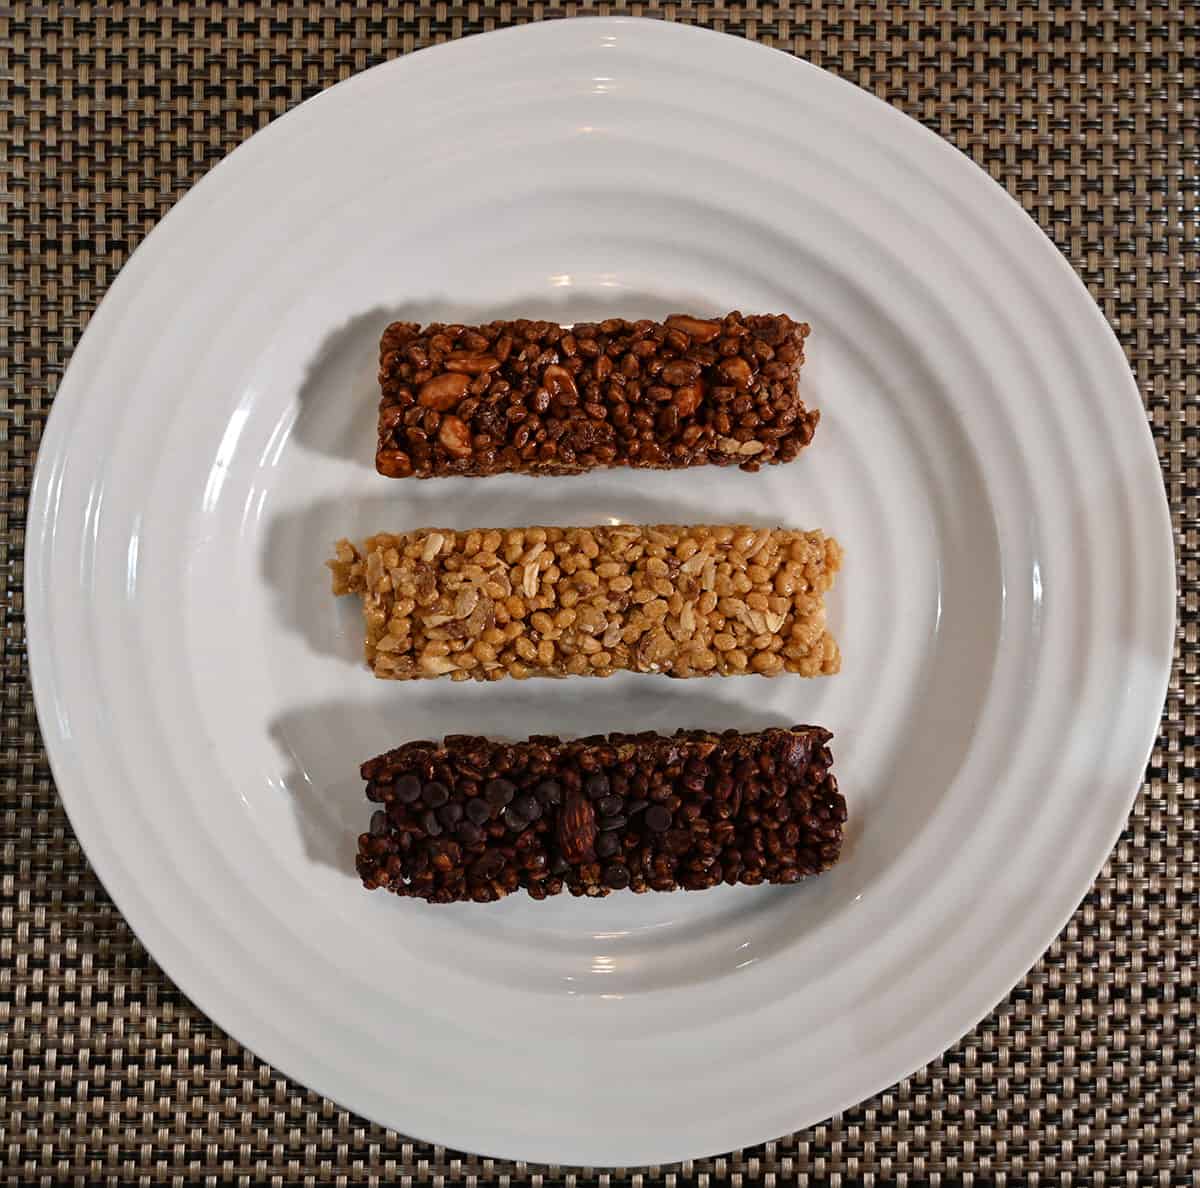 Image of the three different flavors of protein bars out of the wrapper and served on a white plate.